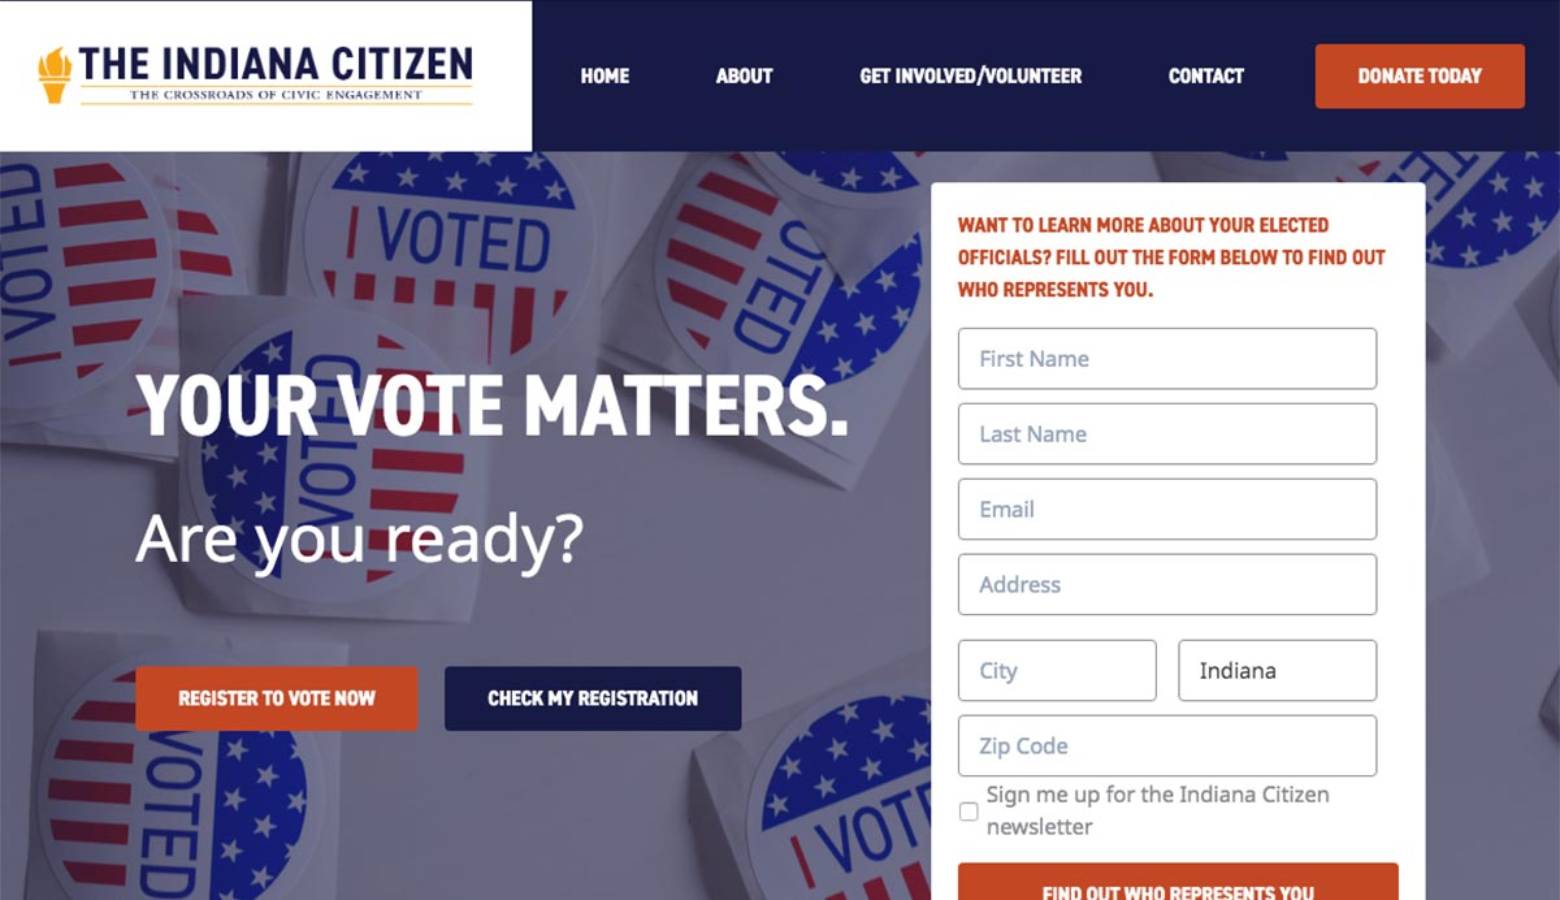 A new non-profit hopes to turn around Indiana's low voter registration and turnout with the launch of a voter engagement effort called the Indiana Citizen. (indianacitizen.org)